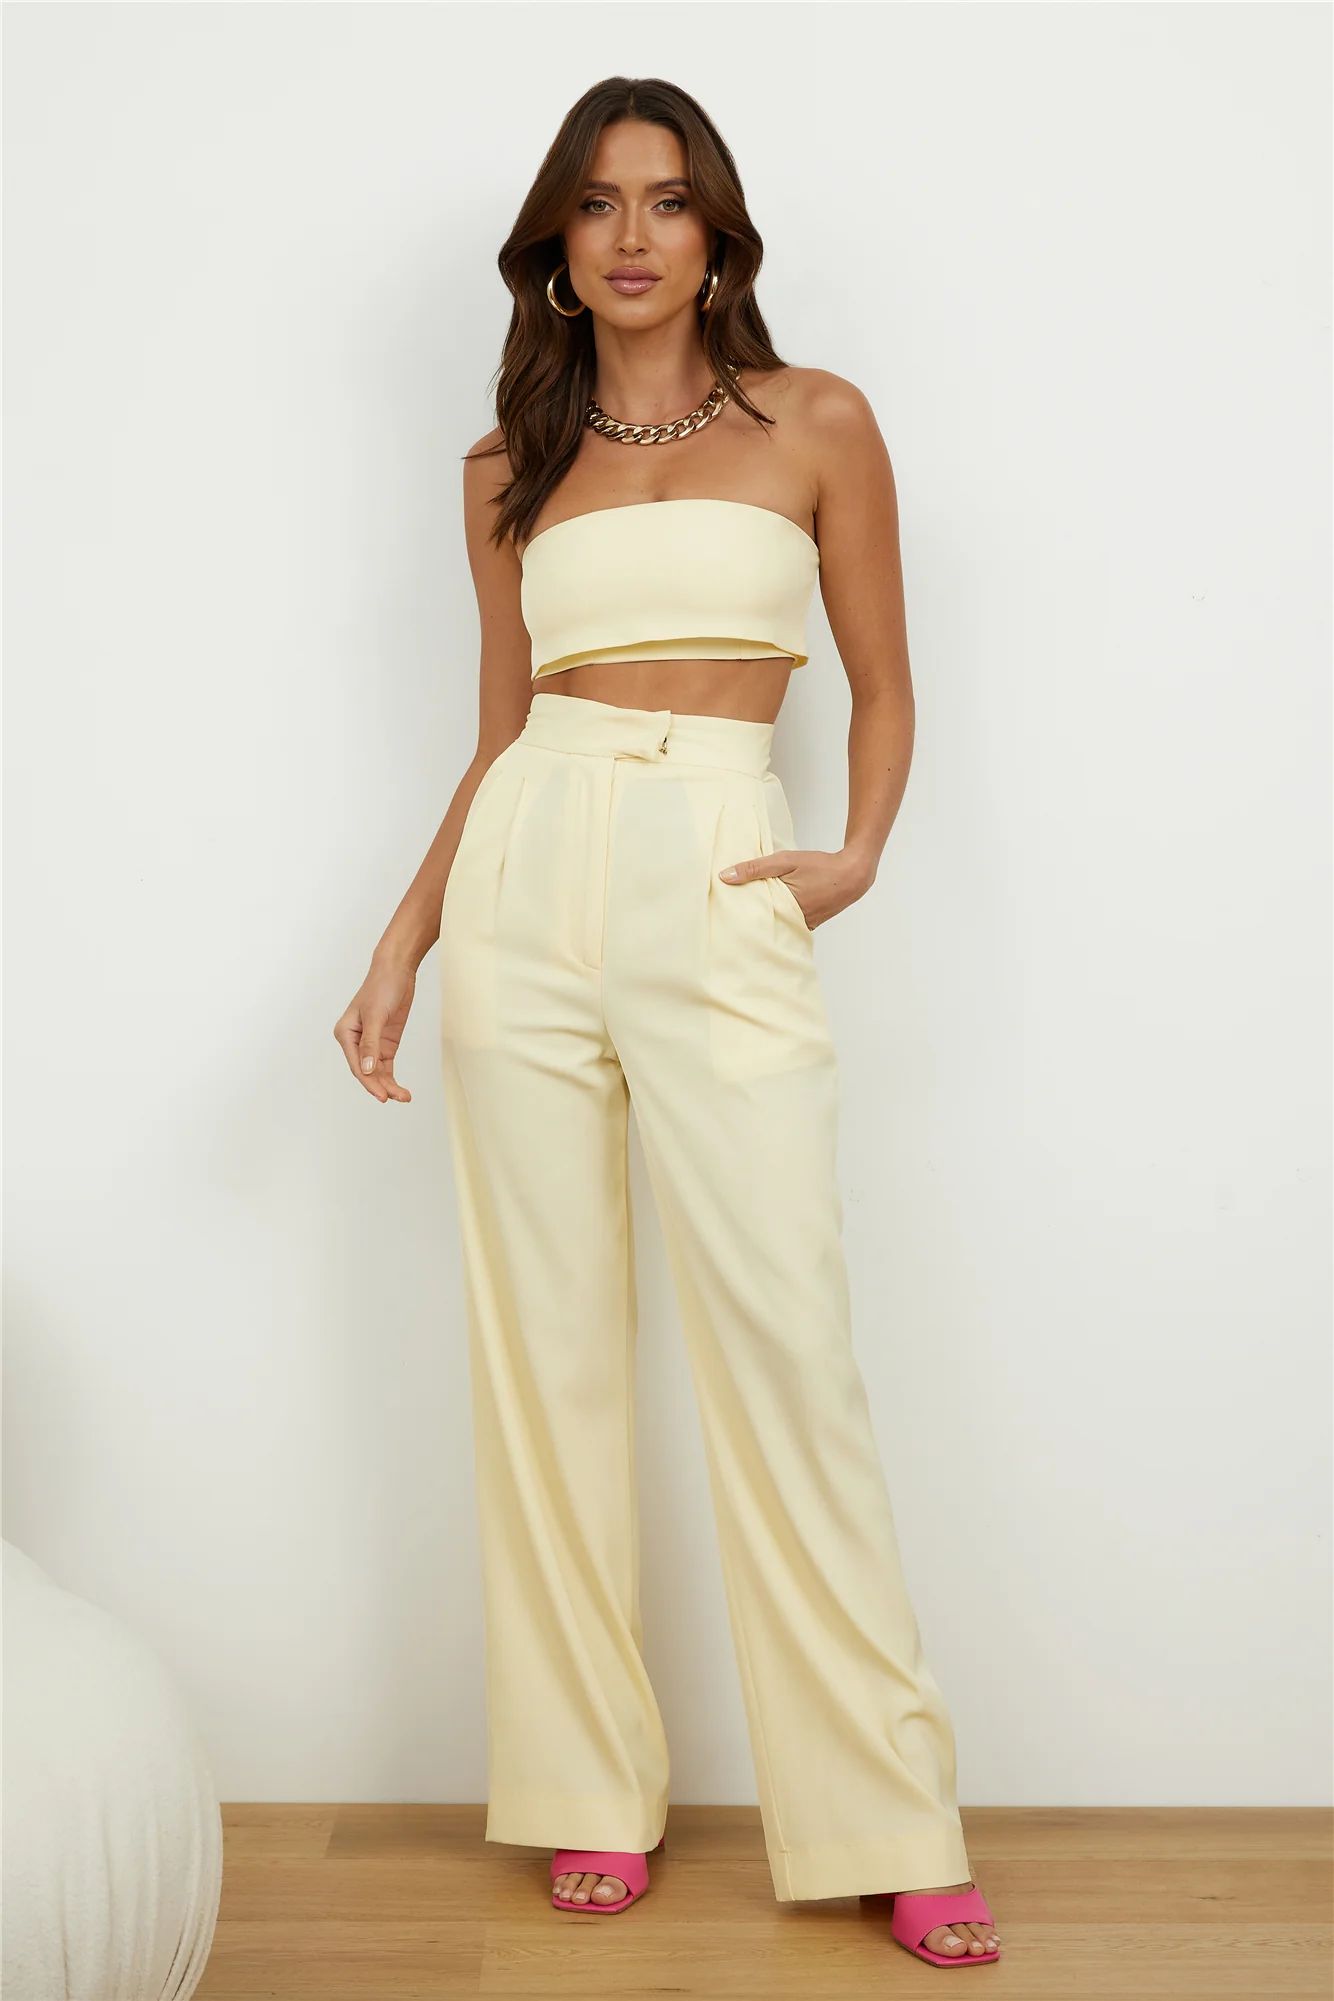 Blind Love Pants Pale Yellow | Hello Molly